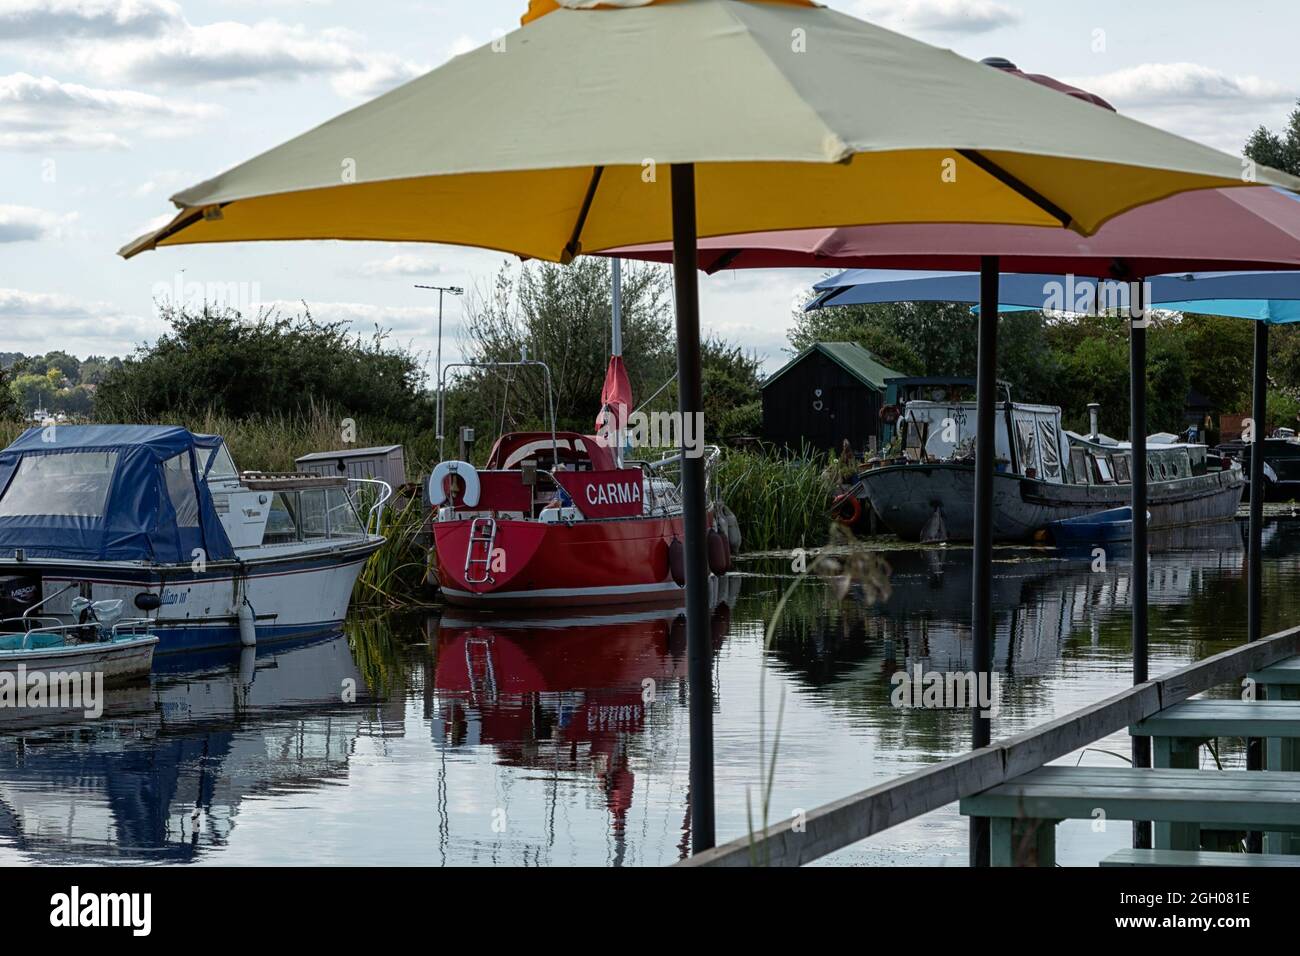 HEYBRIDGE BASIN, ESSEX, UK - AUGUST 25, 2021:  Moored boats on the Chelmer and Blackwater Navigation below umbrellas at riverside Cafe in summer Stock Photo